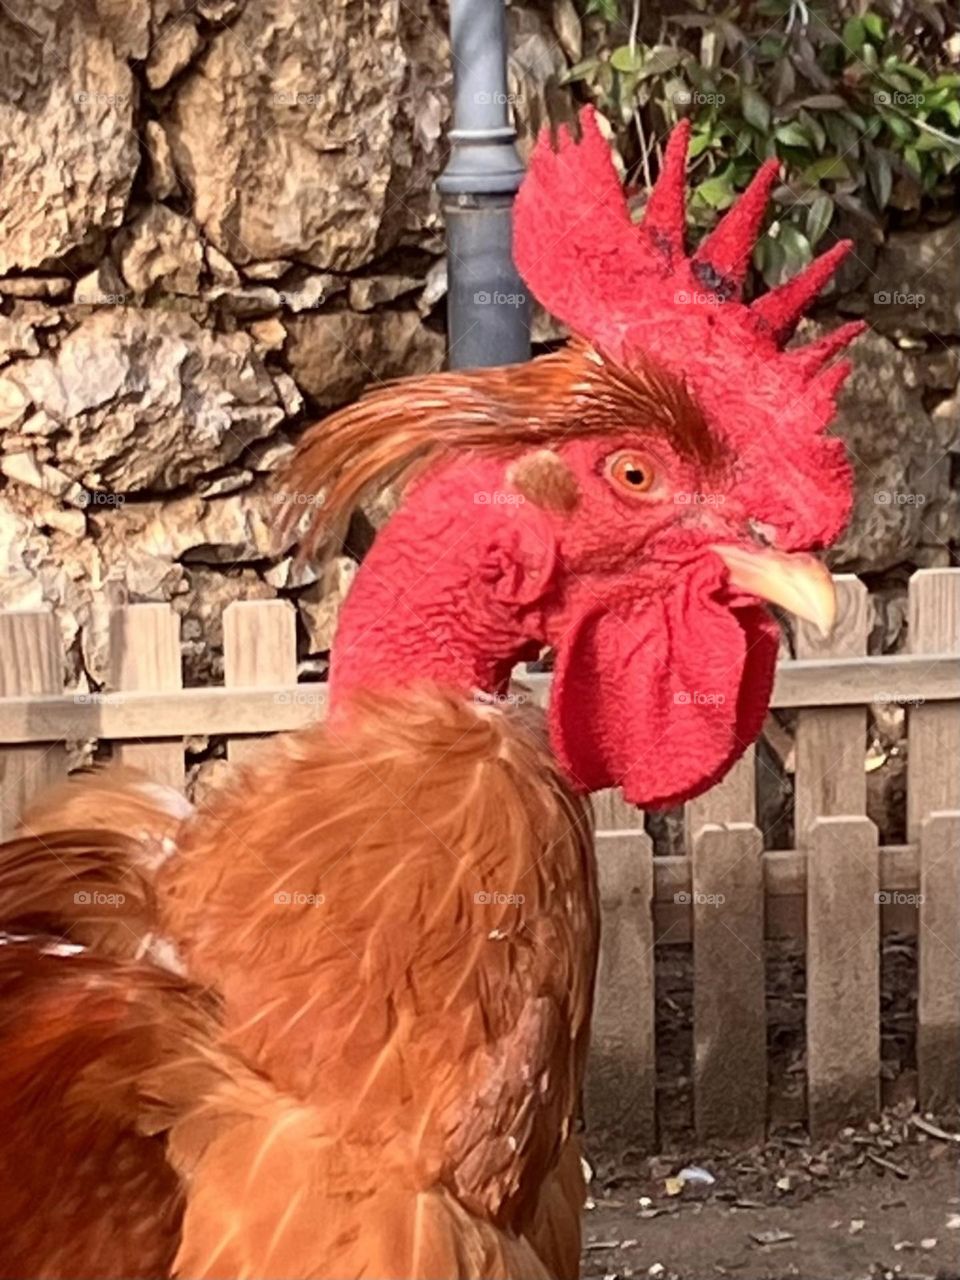 The red crest of a rooster